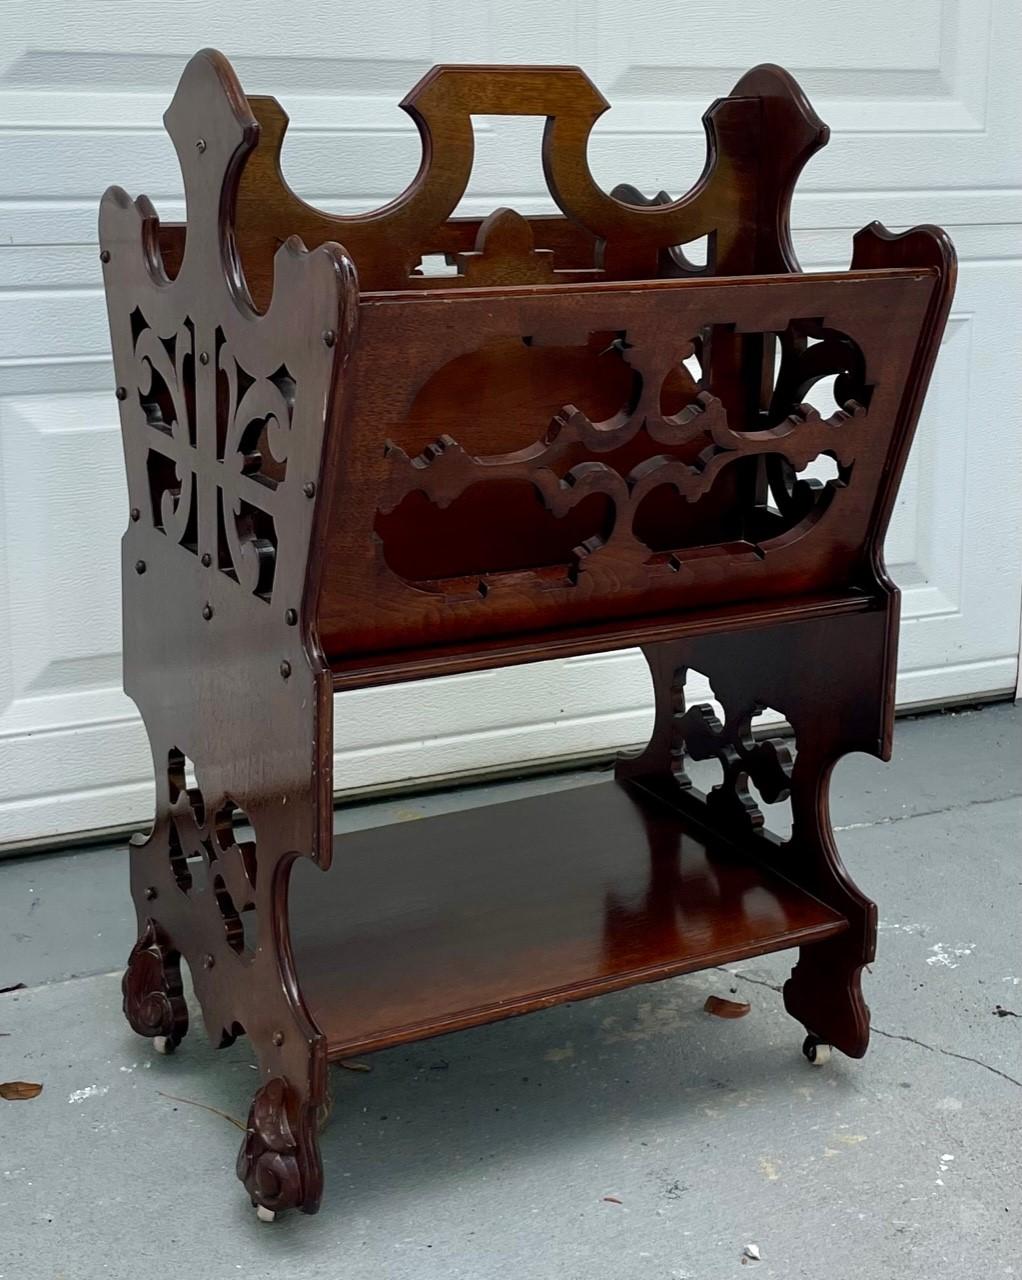 English Victorian Two Tier Walnut Canterbury circa 1880.

Victorian period 1880 canterbury in solid walnut with hand carved scrollwork. This two tiered rolling magazine rack features ornate, pierced woodwork with fret carved side panels and